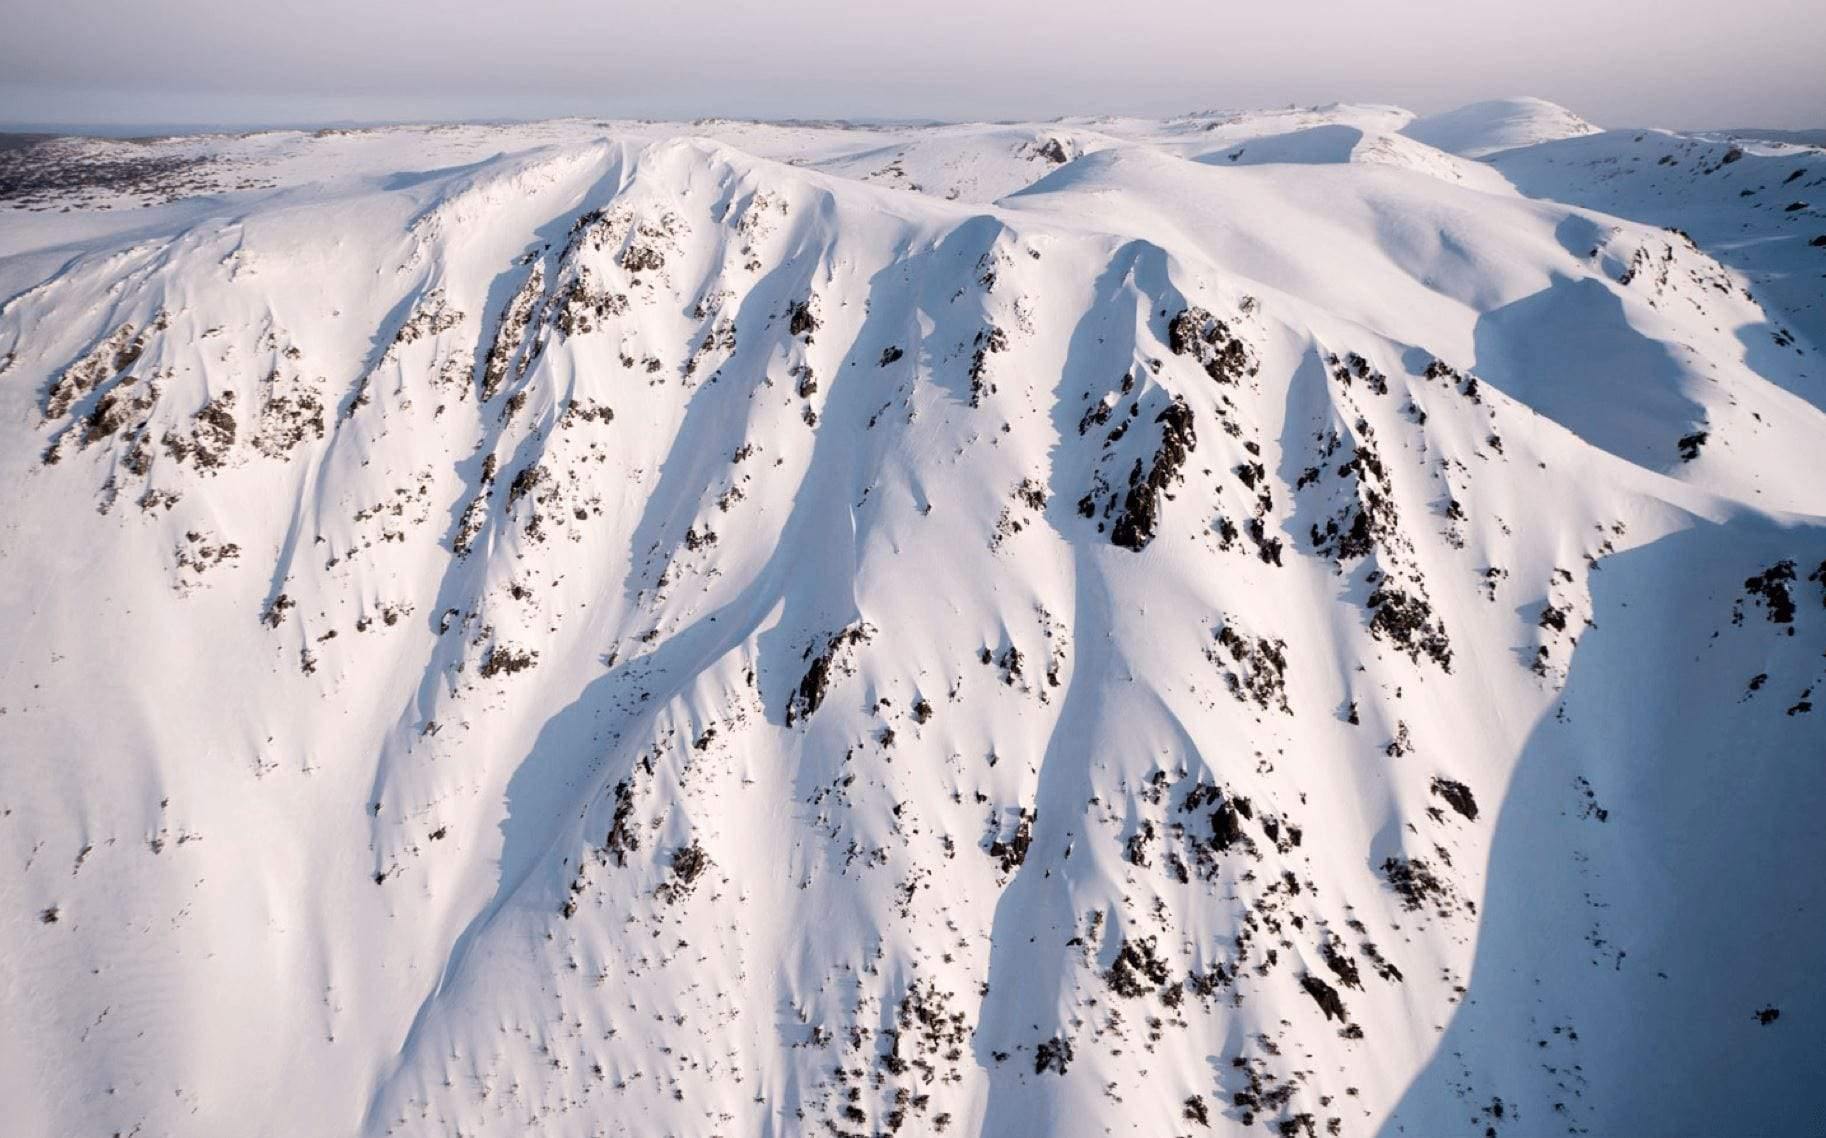 A giant mountain fully covered with fresh snow and some spots of wet sand on it, depicting a white ice-cream with chocolate chips on it, Carruthers - Snowy Mountains NSW